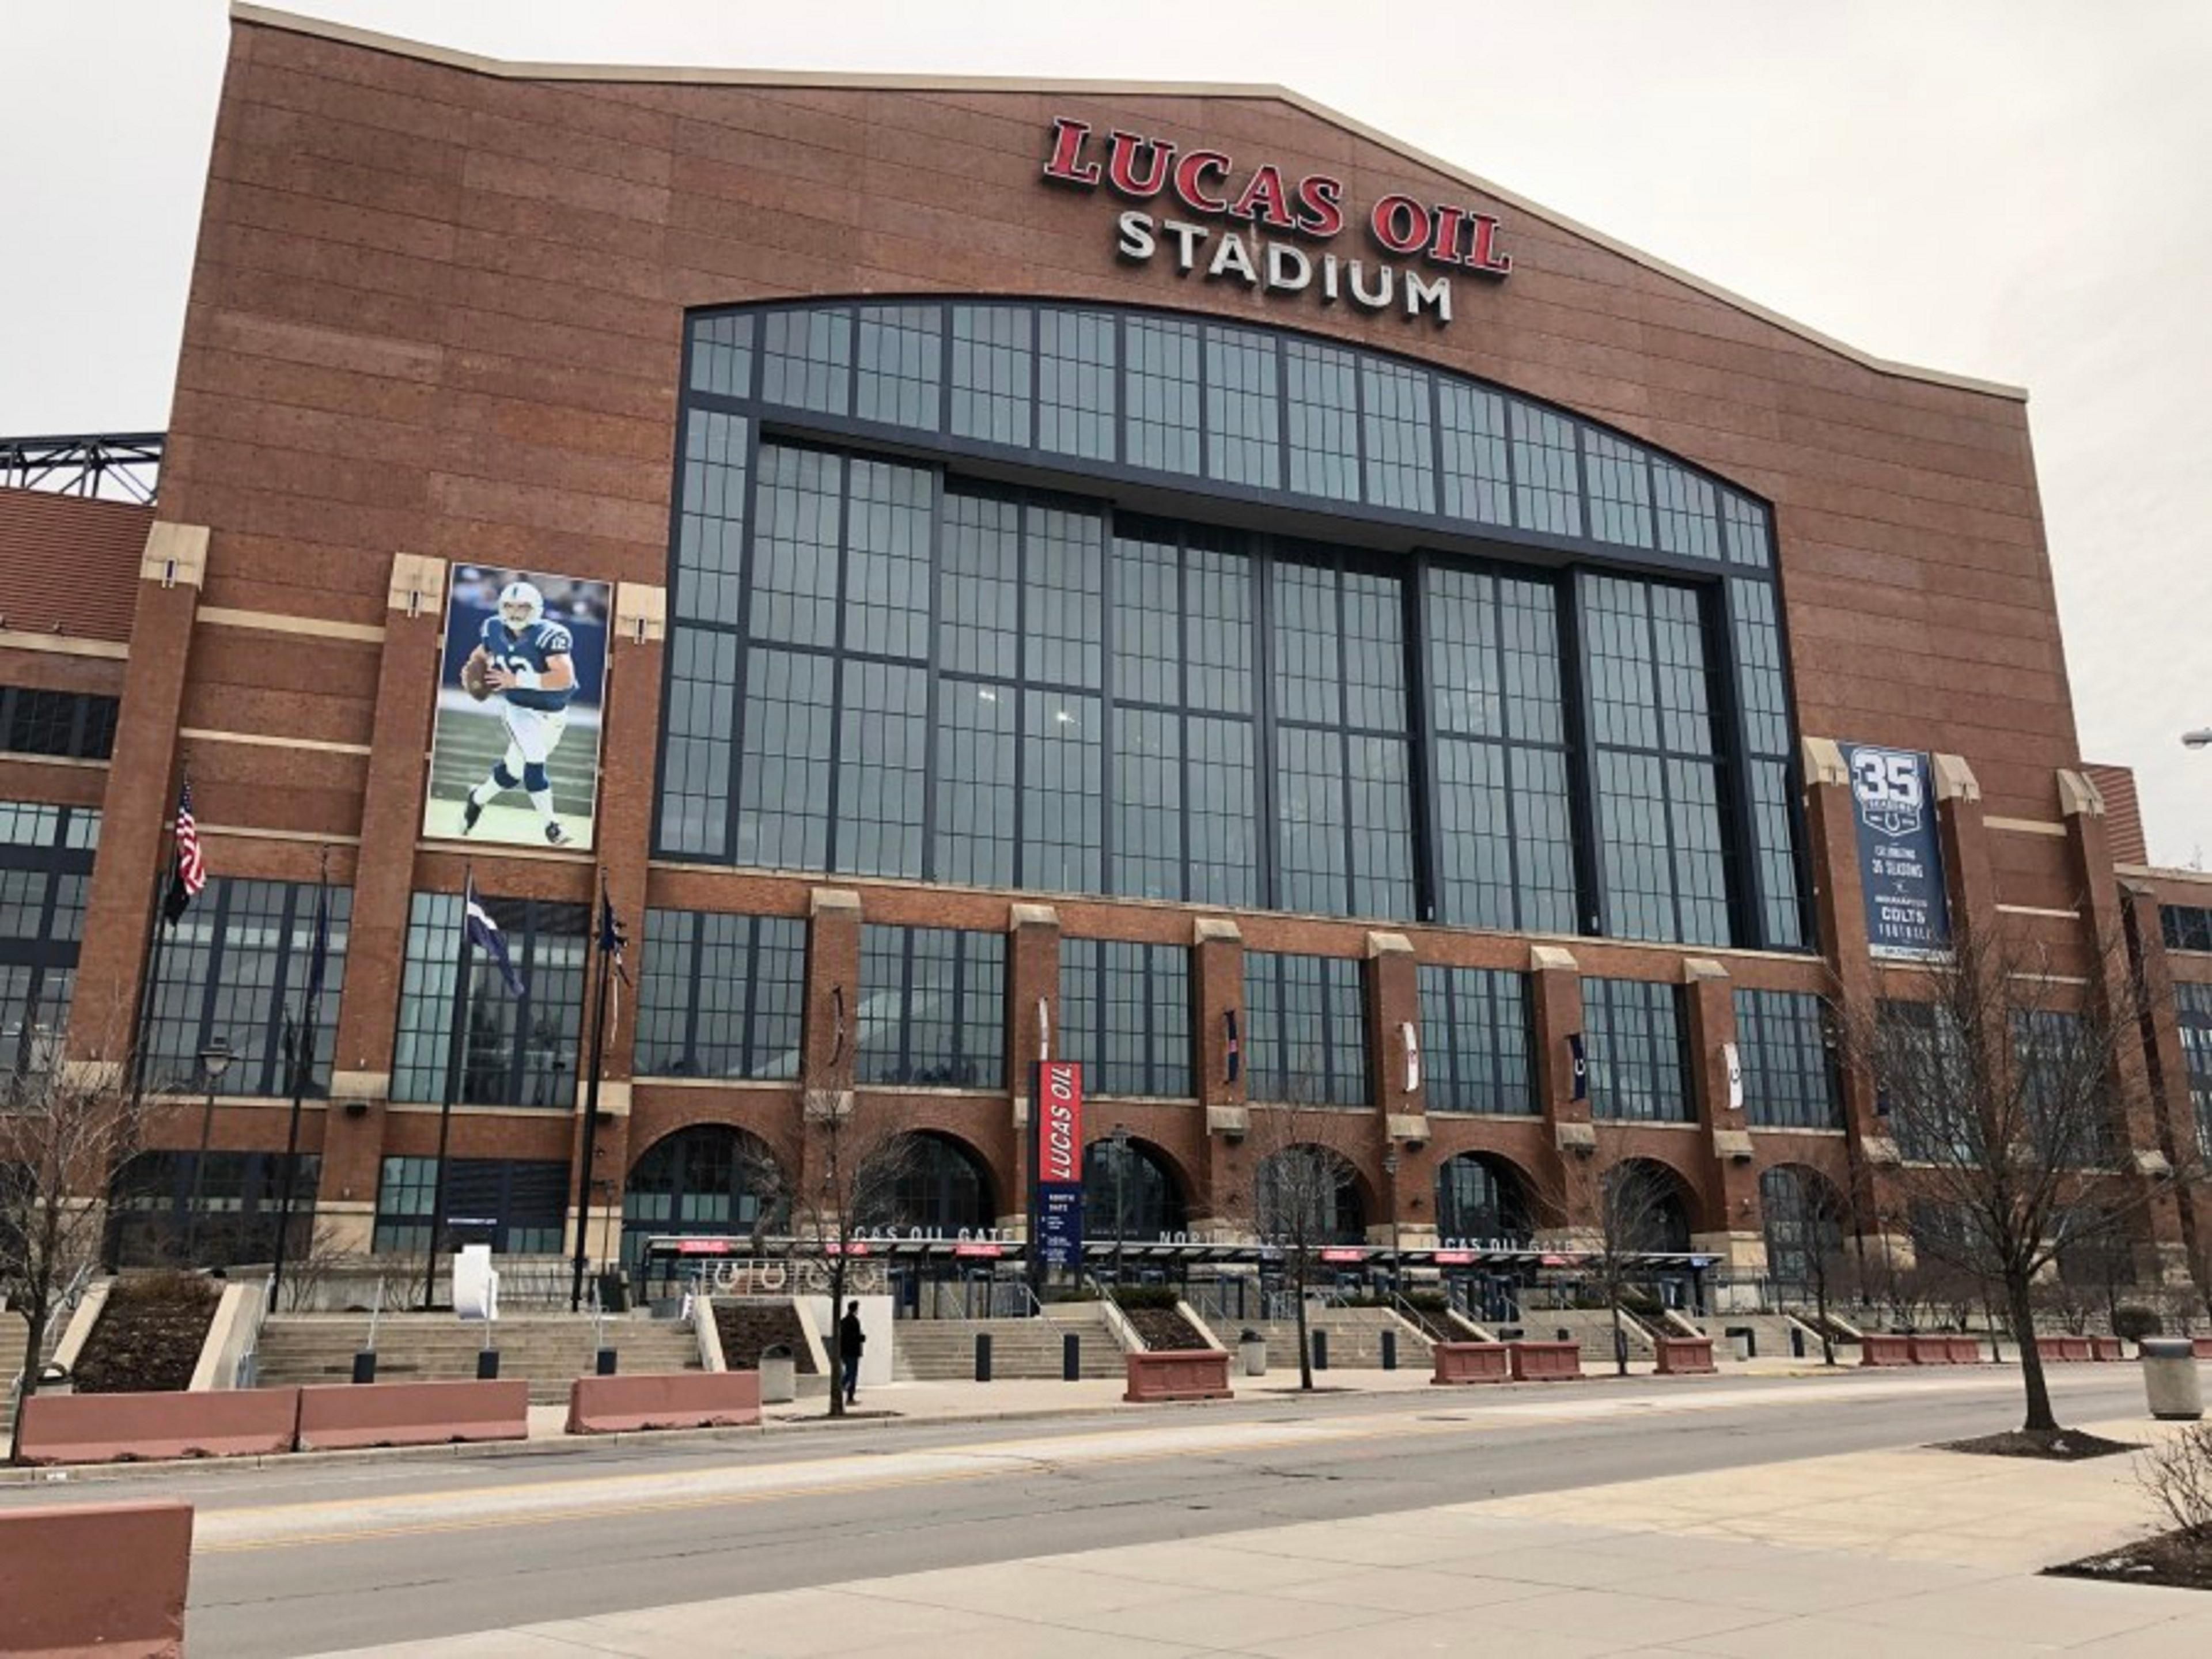 Stay with us when visiting Lucas Oil Stadium. We are just a short 4 minute walk from the front door!